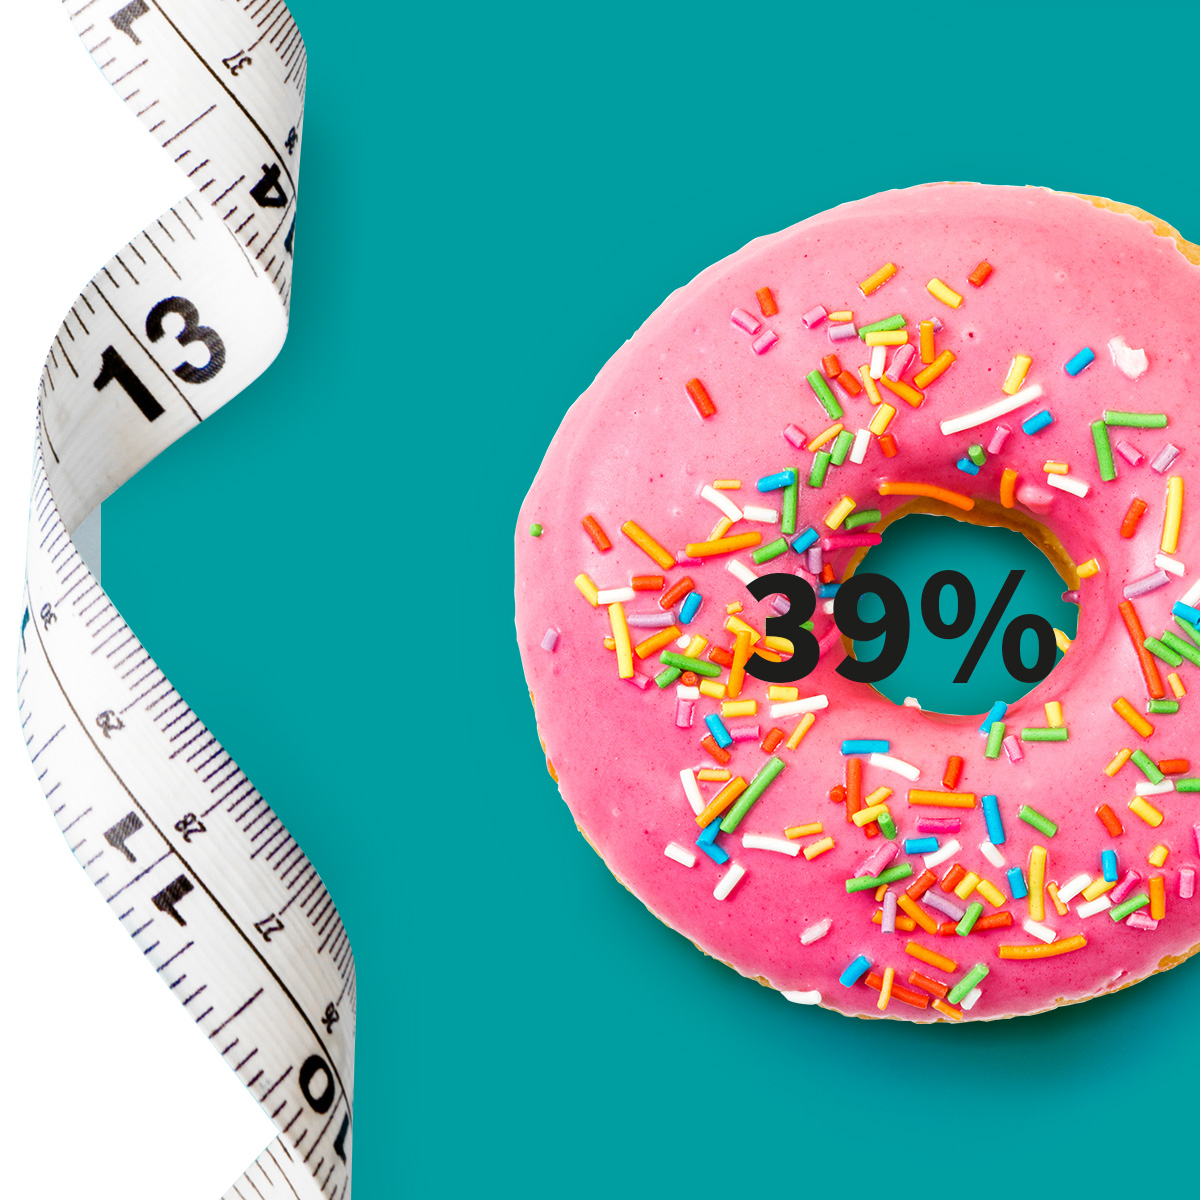 [.PL-pl Poland (polish)] •	A measuring tape and a doughnut with pink icing and colourful sugar sprinkle as a metaphor for obesity